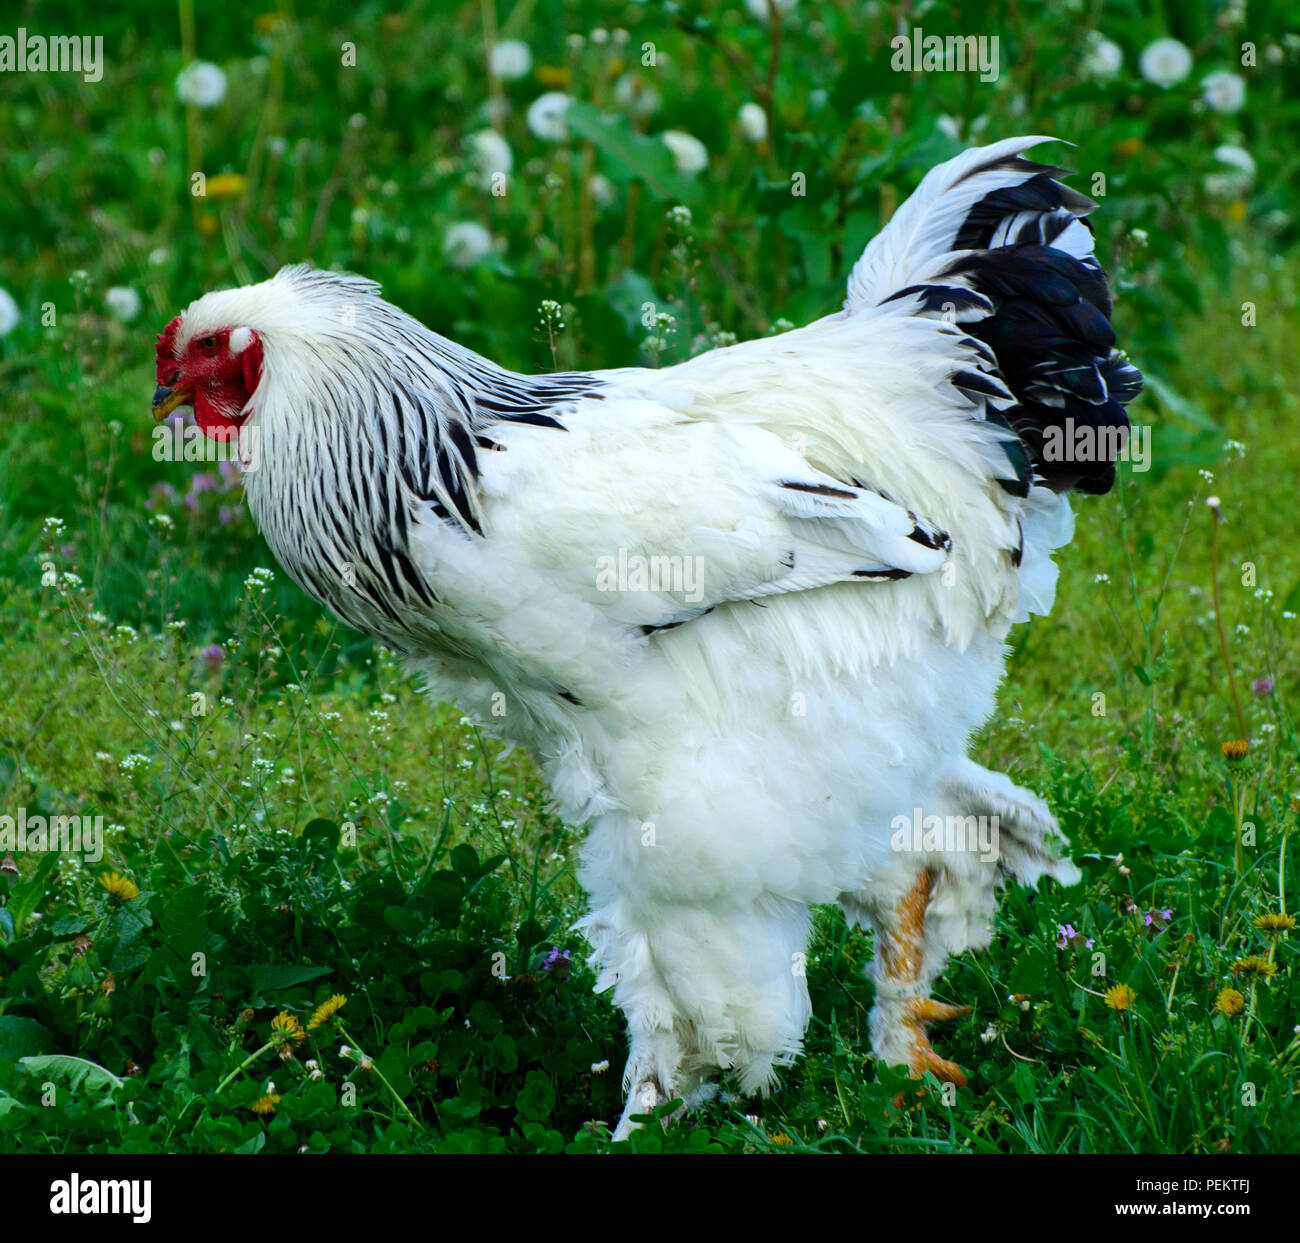 https://c8.alamy.com/comp/PEKTFJ/a-very-large-brahma-chicken-with-an-arco-red-comb-on-its-head-and-black-and-white-color-grazing-on-the-background-of-a-juicy-green-grass-PEKTFJ.jpg